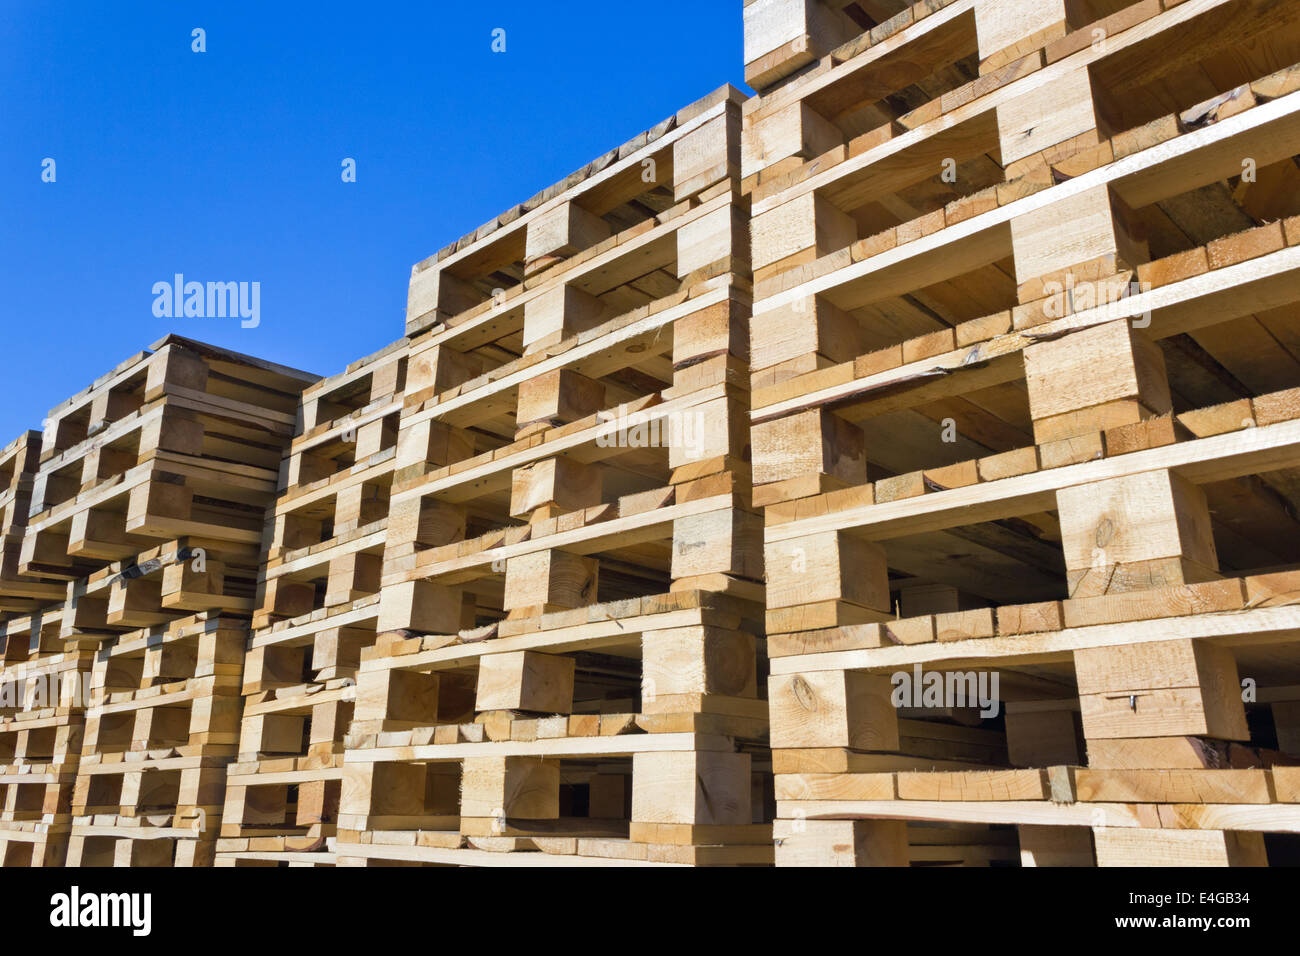 stacked wooden pallets Stock Photo